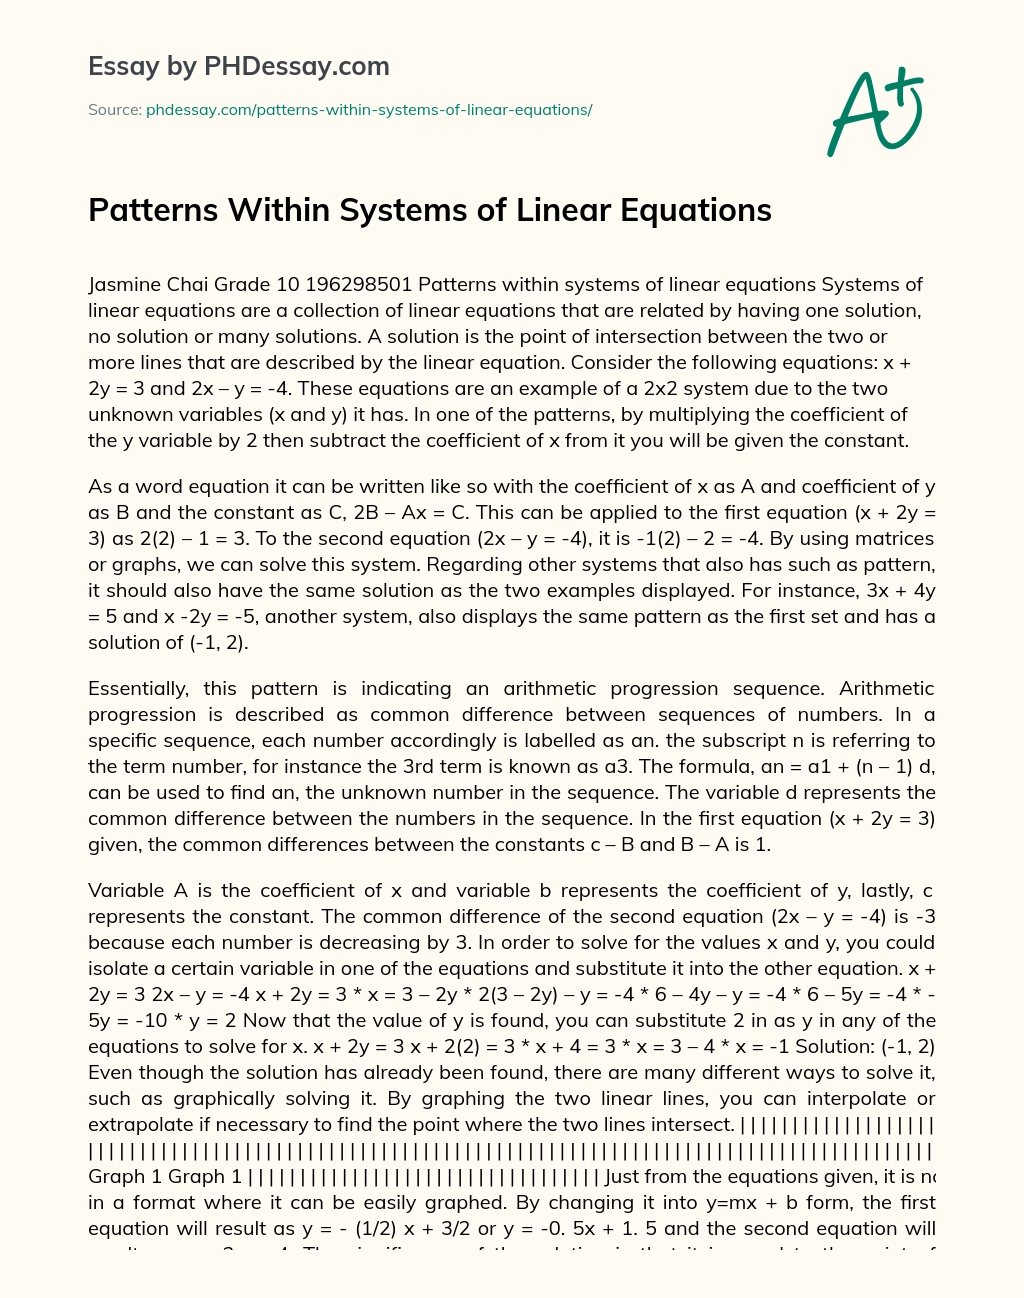 Patterns Within Systems of Linear Equations essay